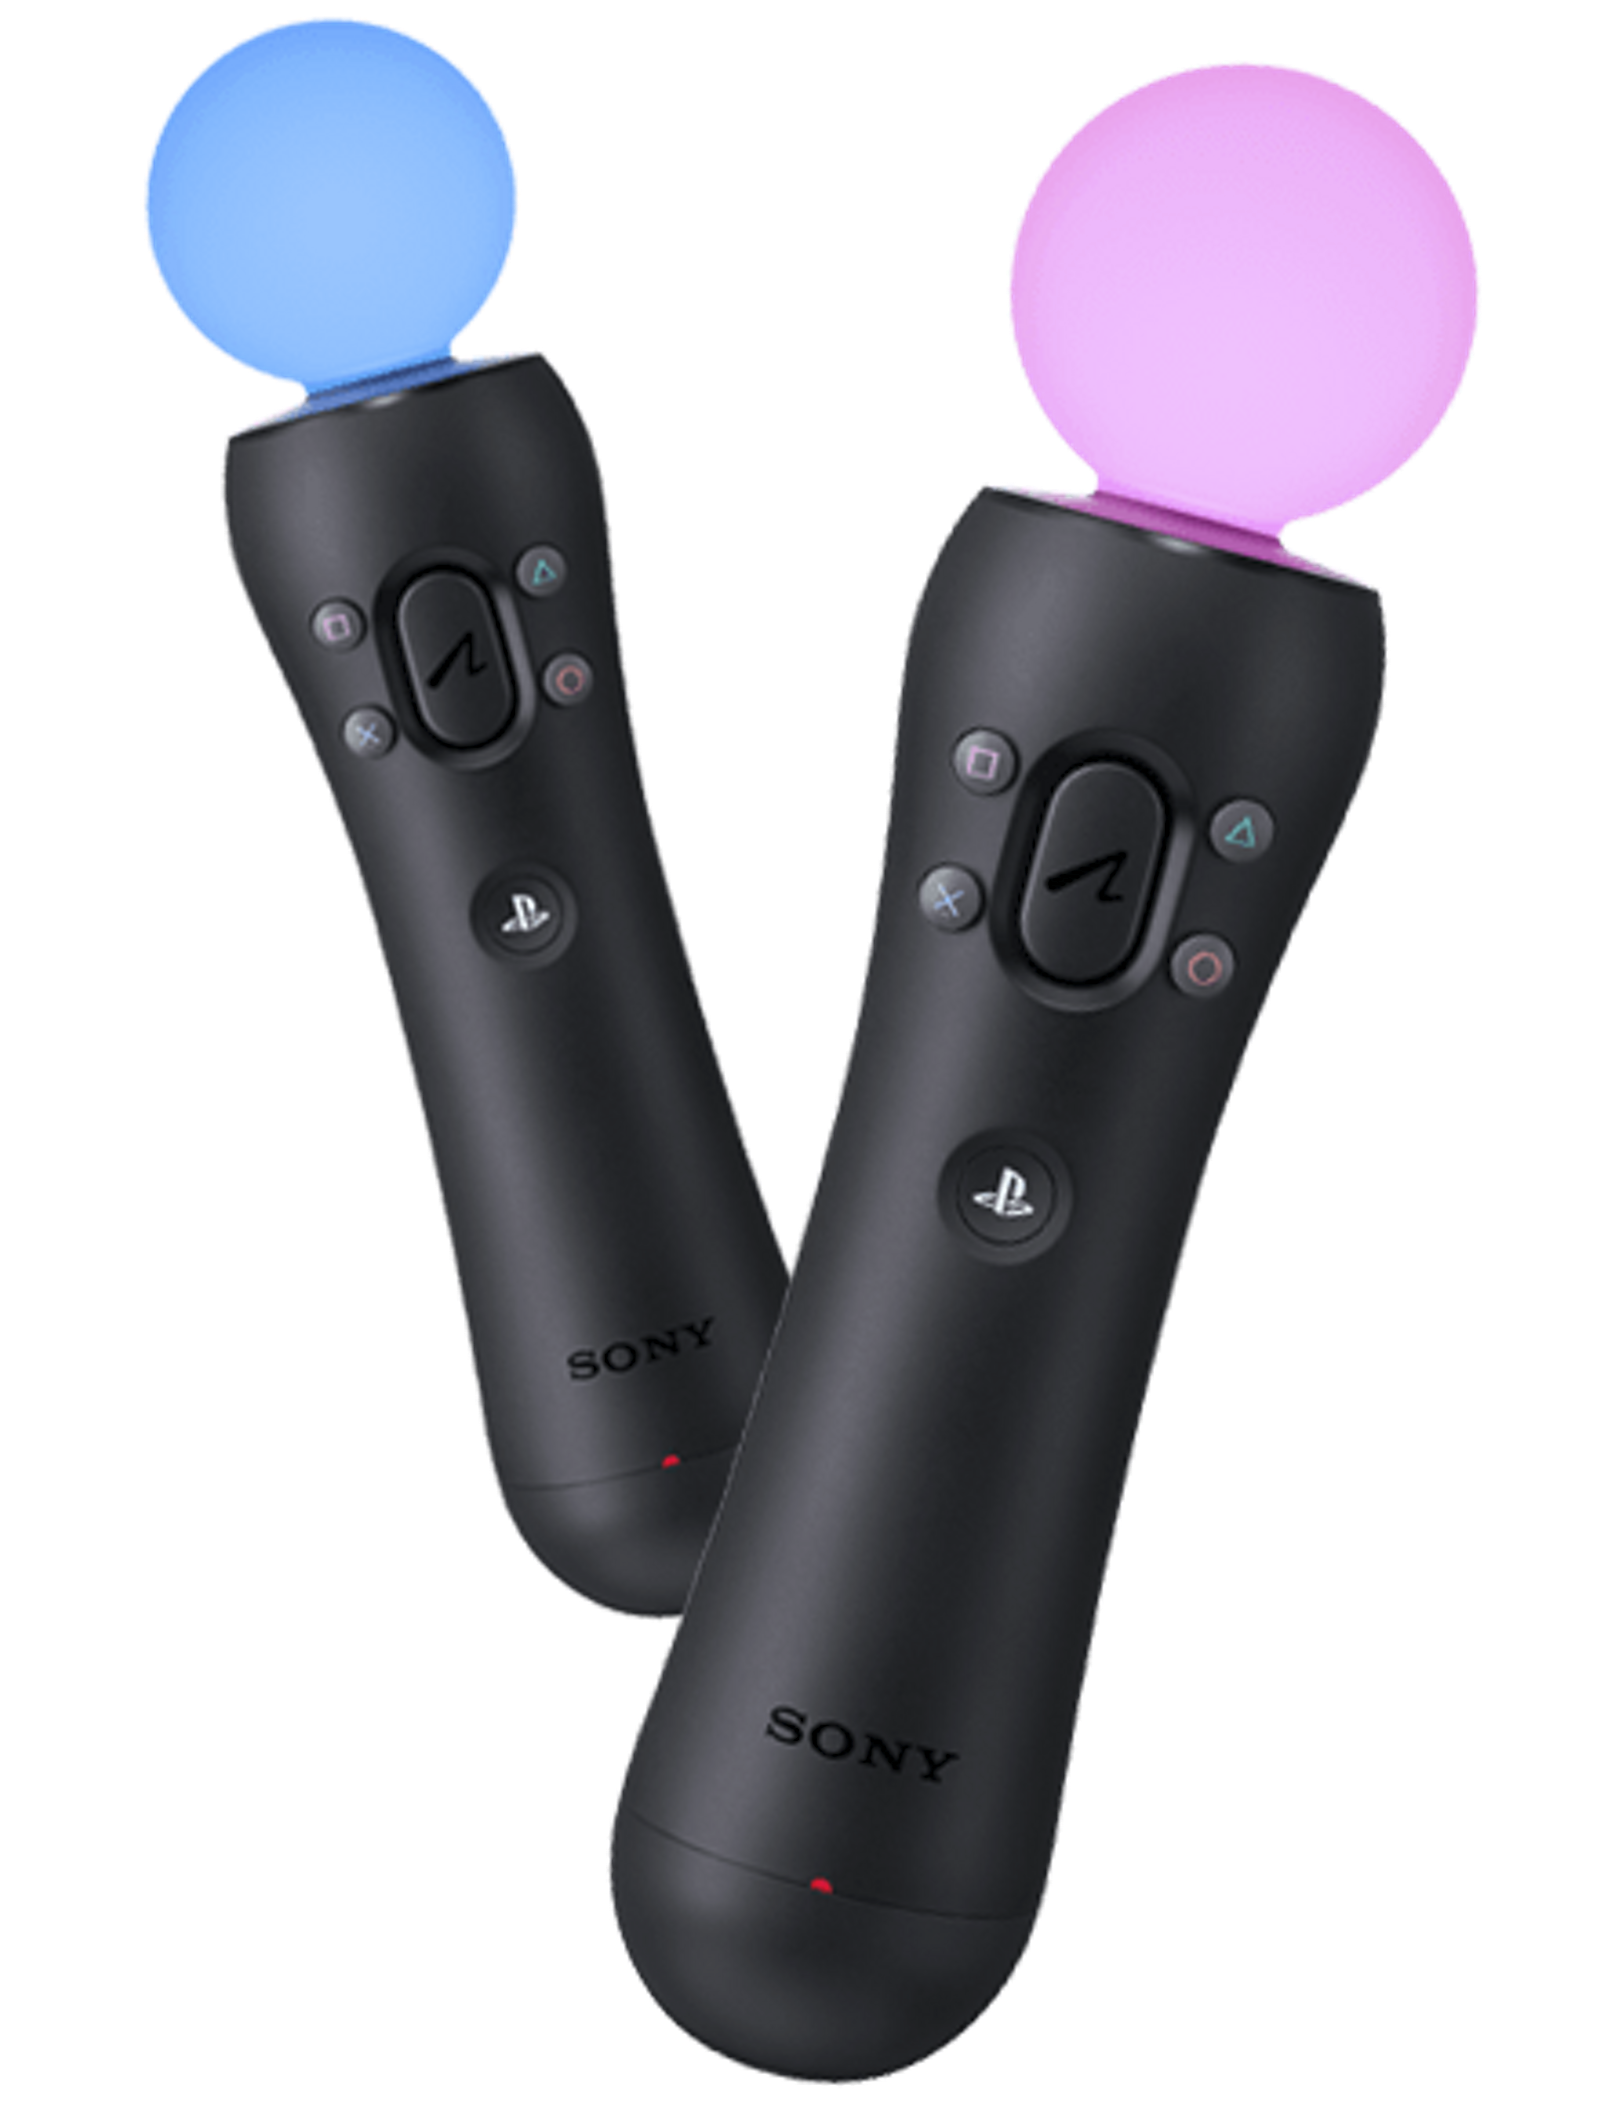 https://gmedia.playstation.com/is/image/SIEPDC/ps4-accessories-move-controllers-two-column-01-ps4-eu-12jul18?$1600px--t$